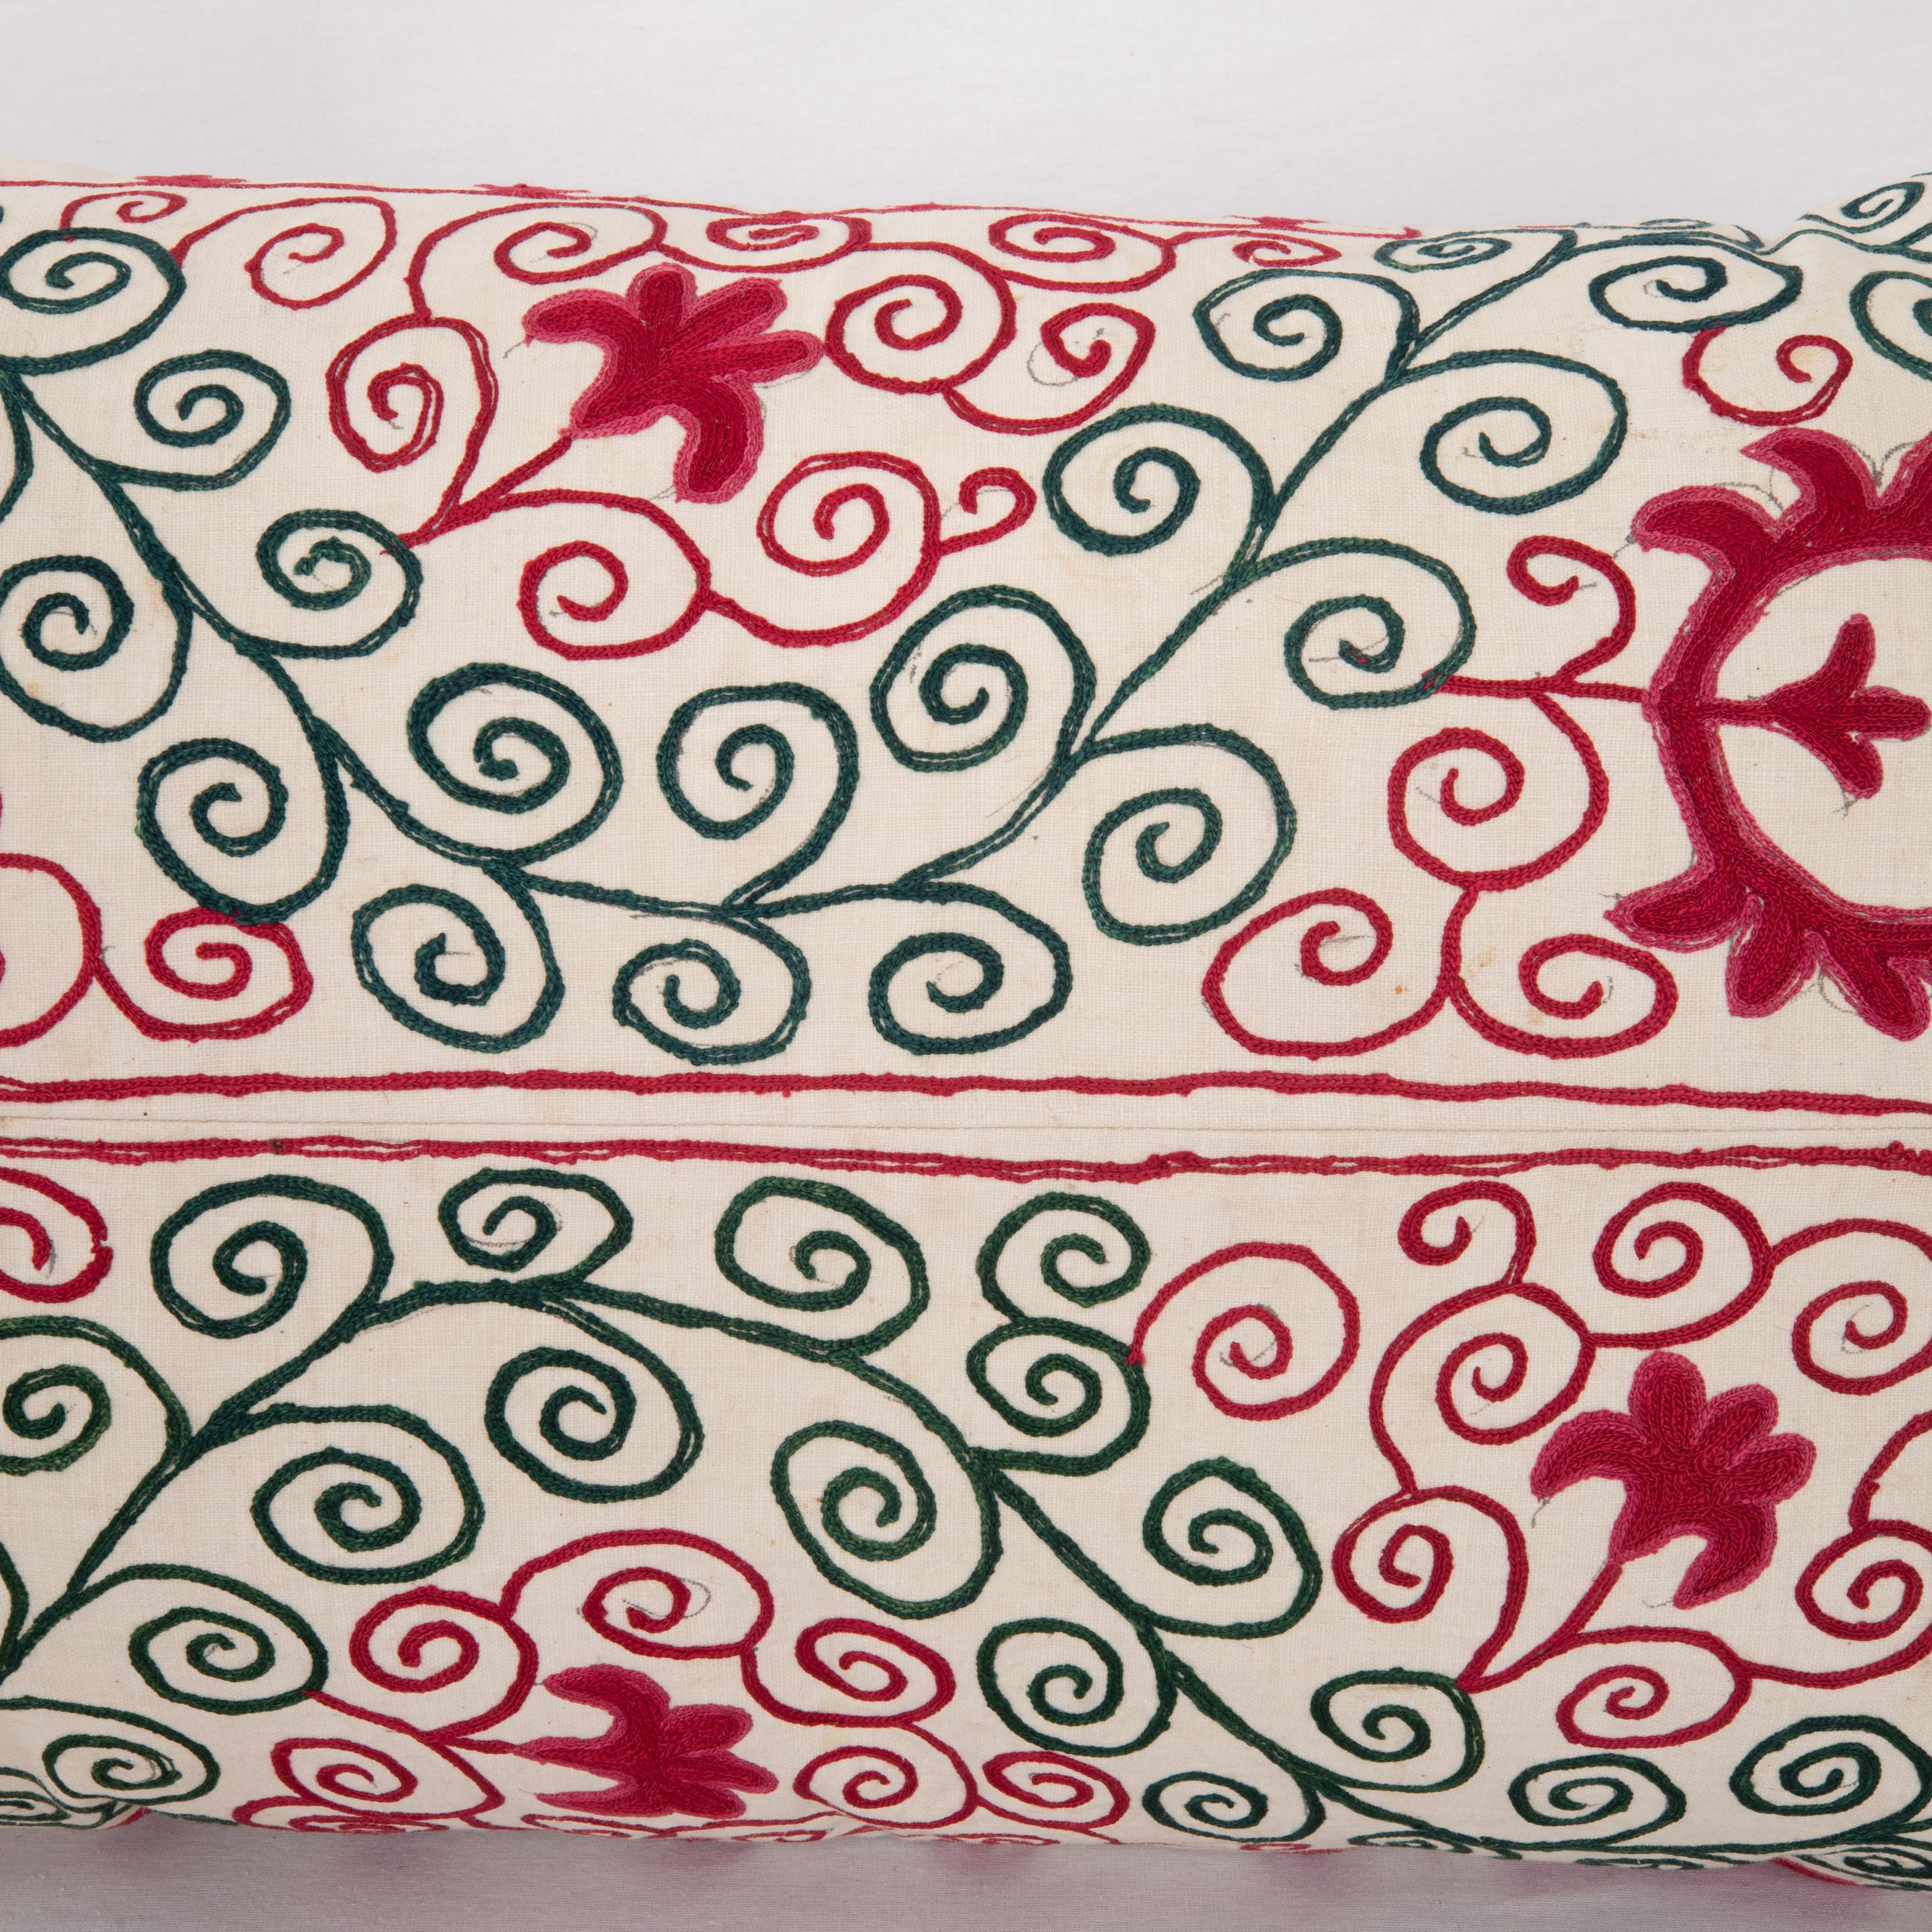 Suzani Pillow Case Made from an Antique Suzani, Early 20th C In Good Condition For Sale In Istanbul, TR